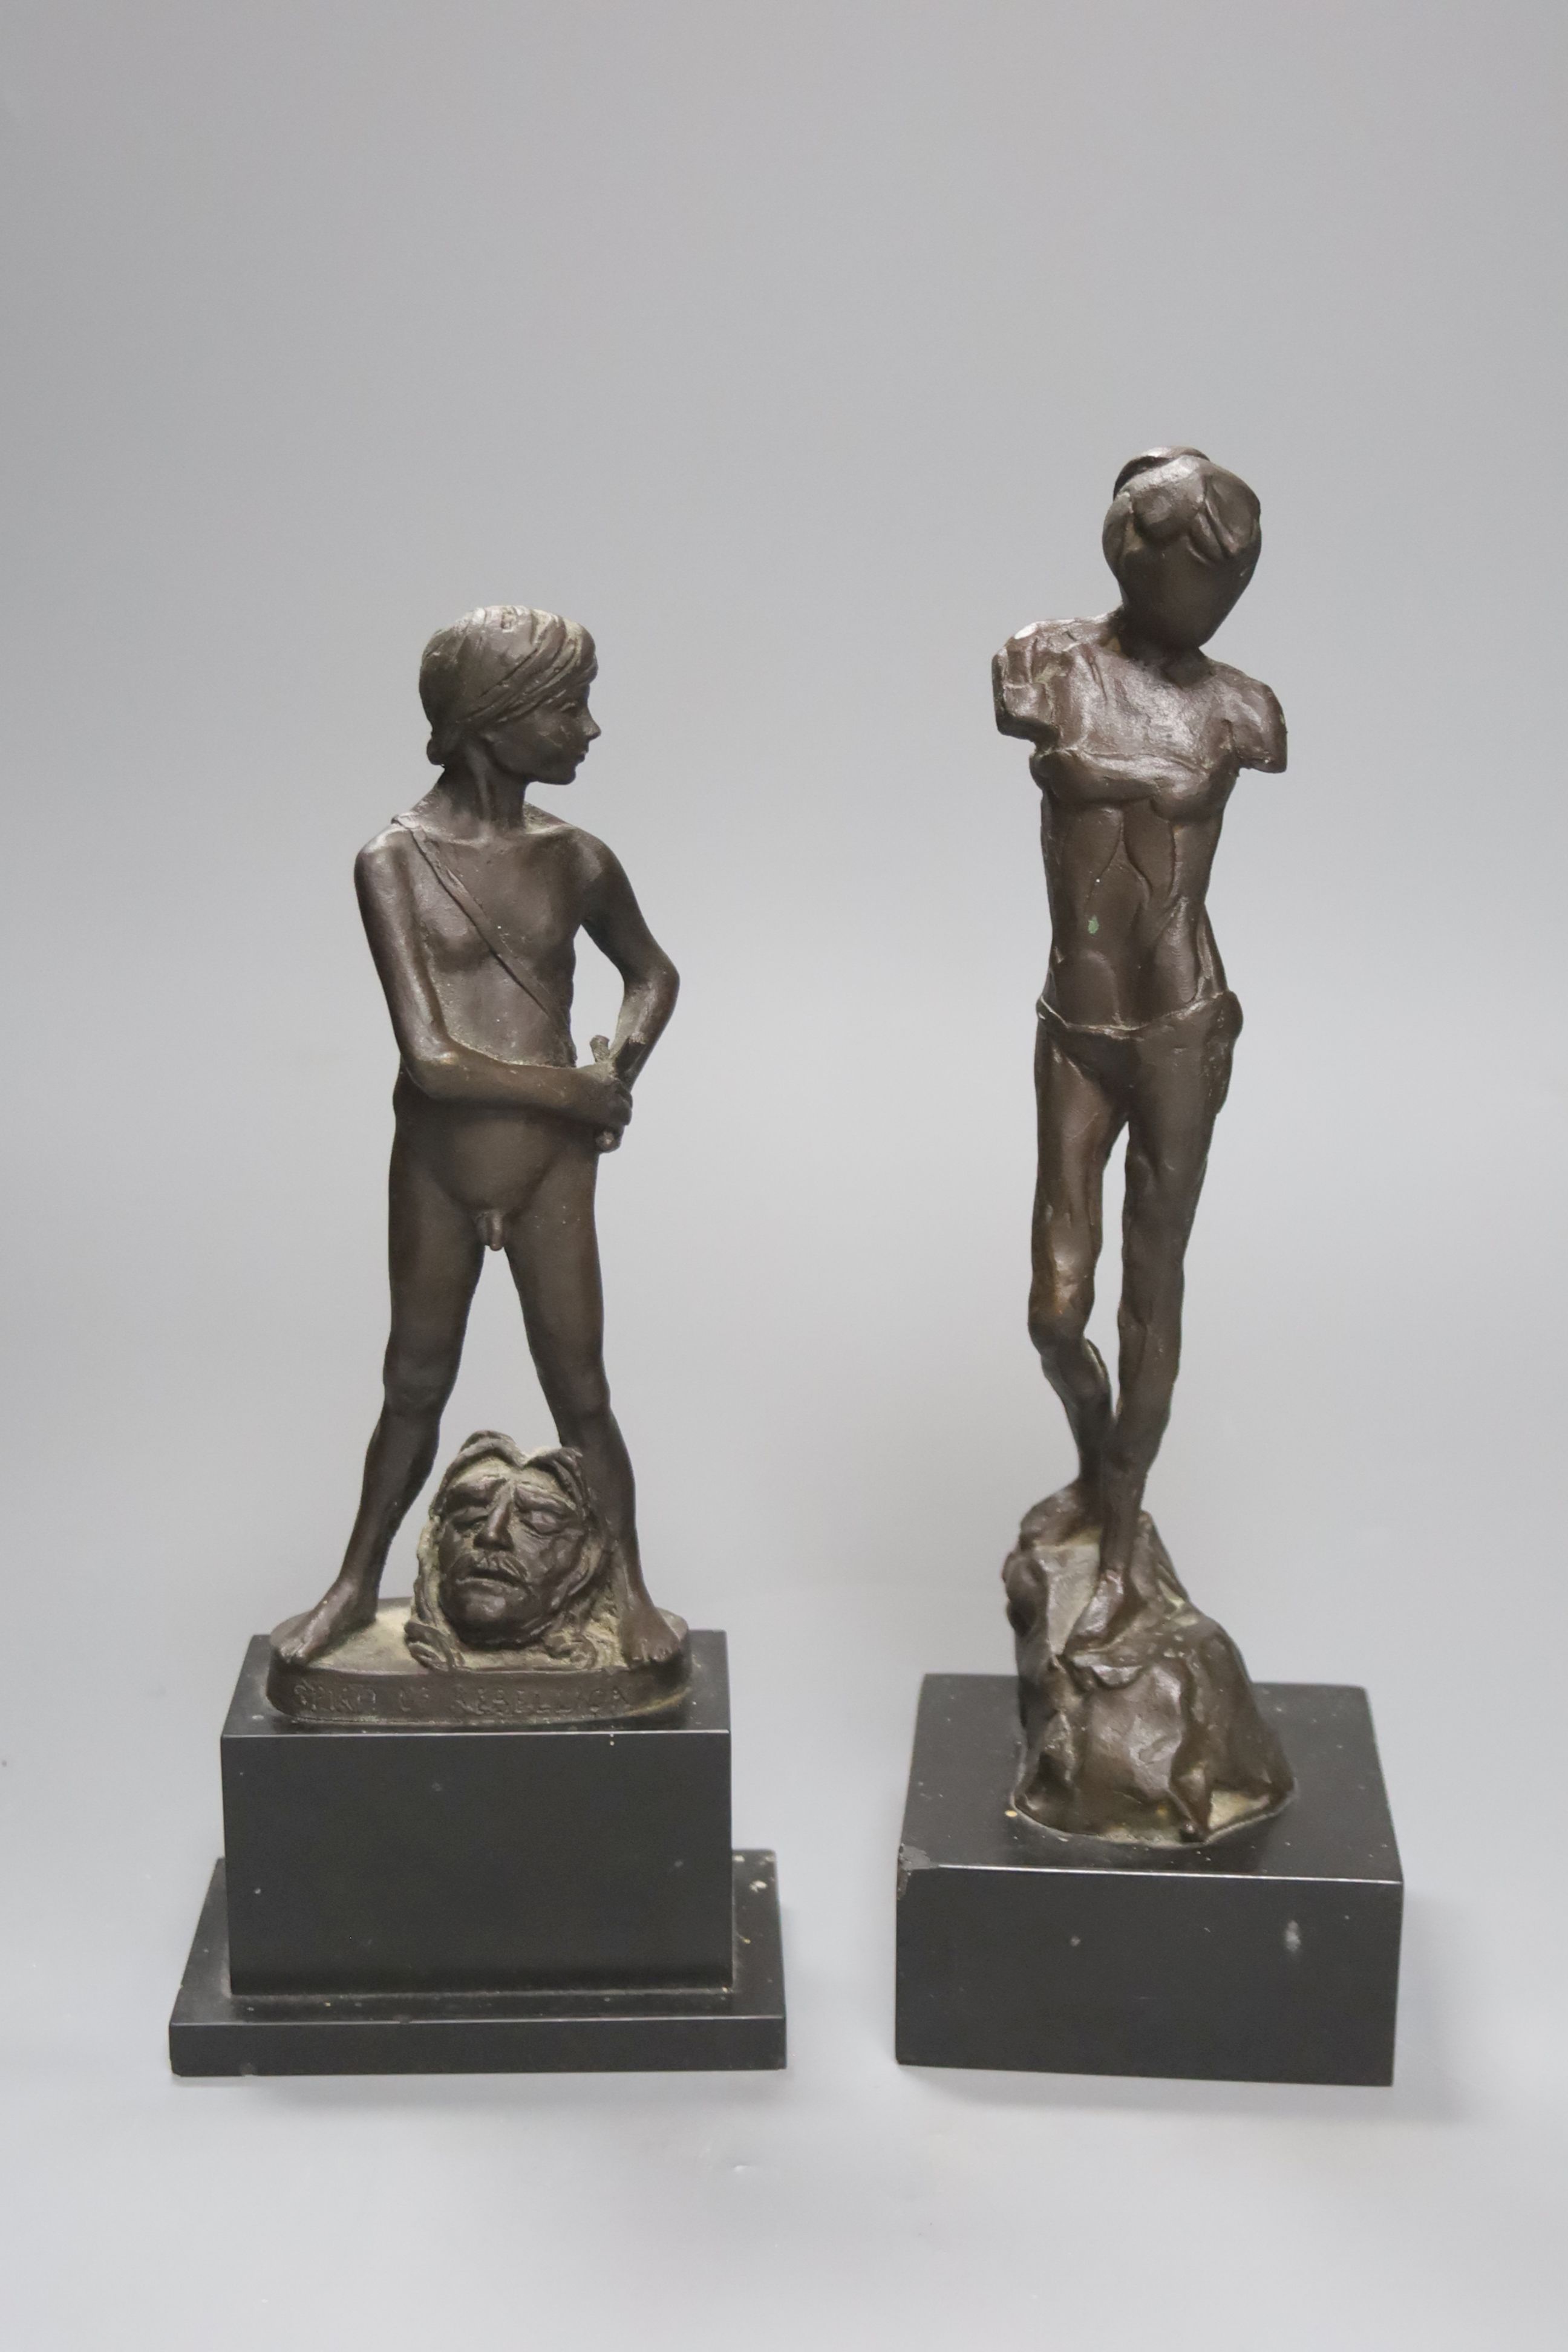 Enzo Plazzotta, Two bronze figural statues, 'Spirit of Rebellion' and another, c.1977, tallest 29cm